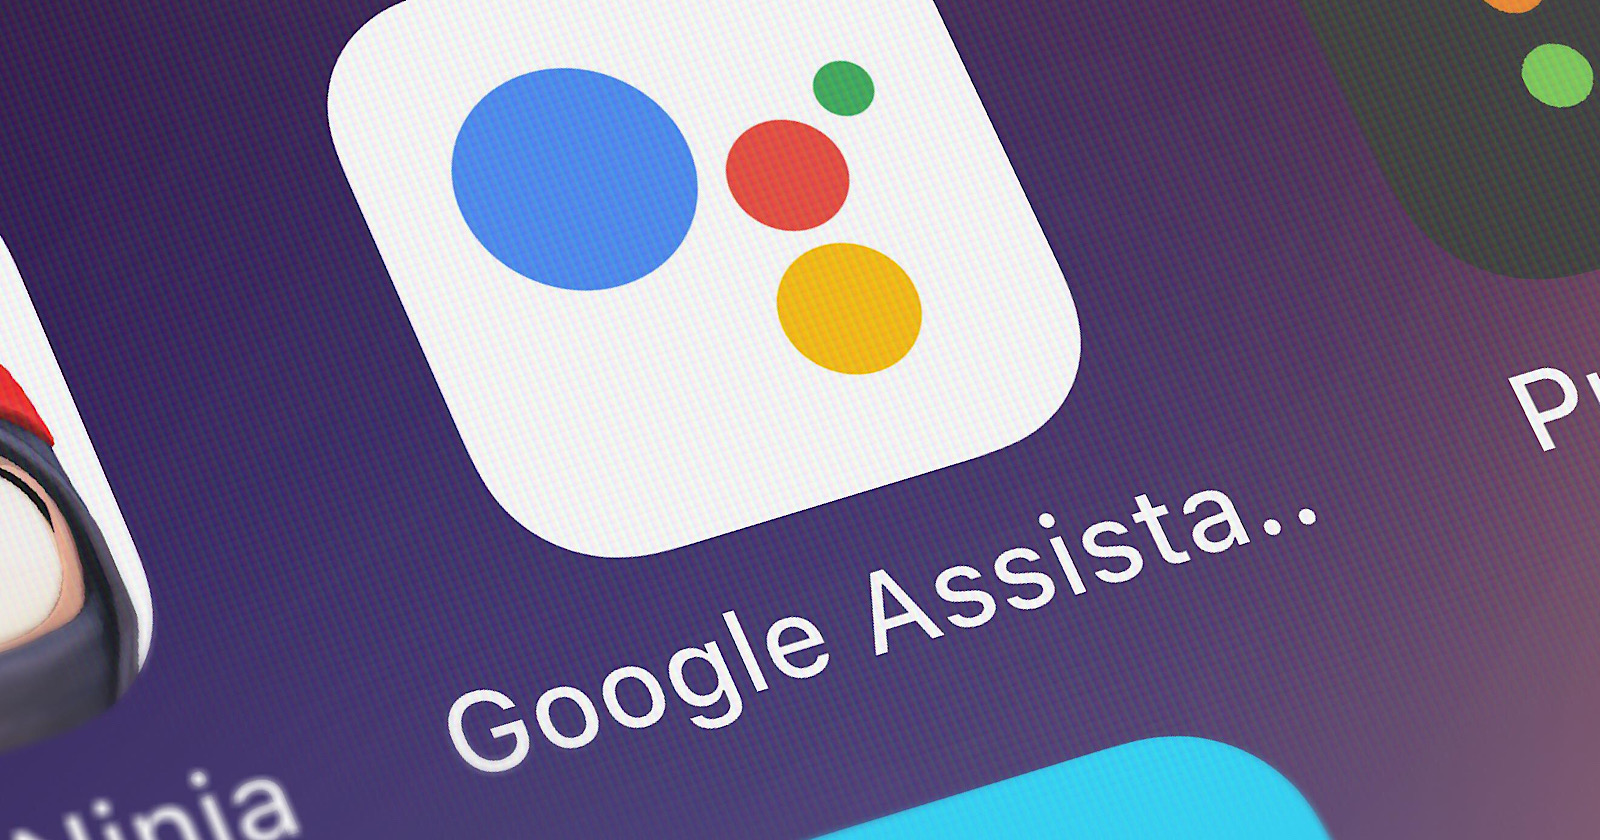 Google Assistant Now Available on over 400 Million Devices